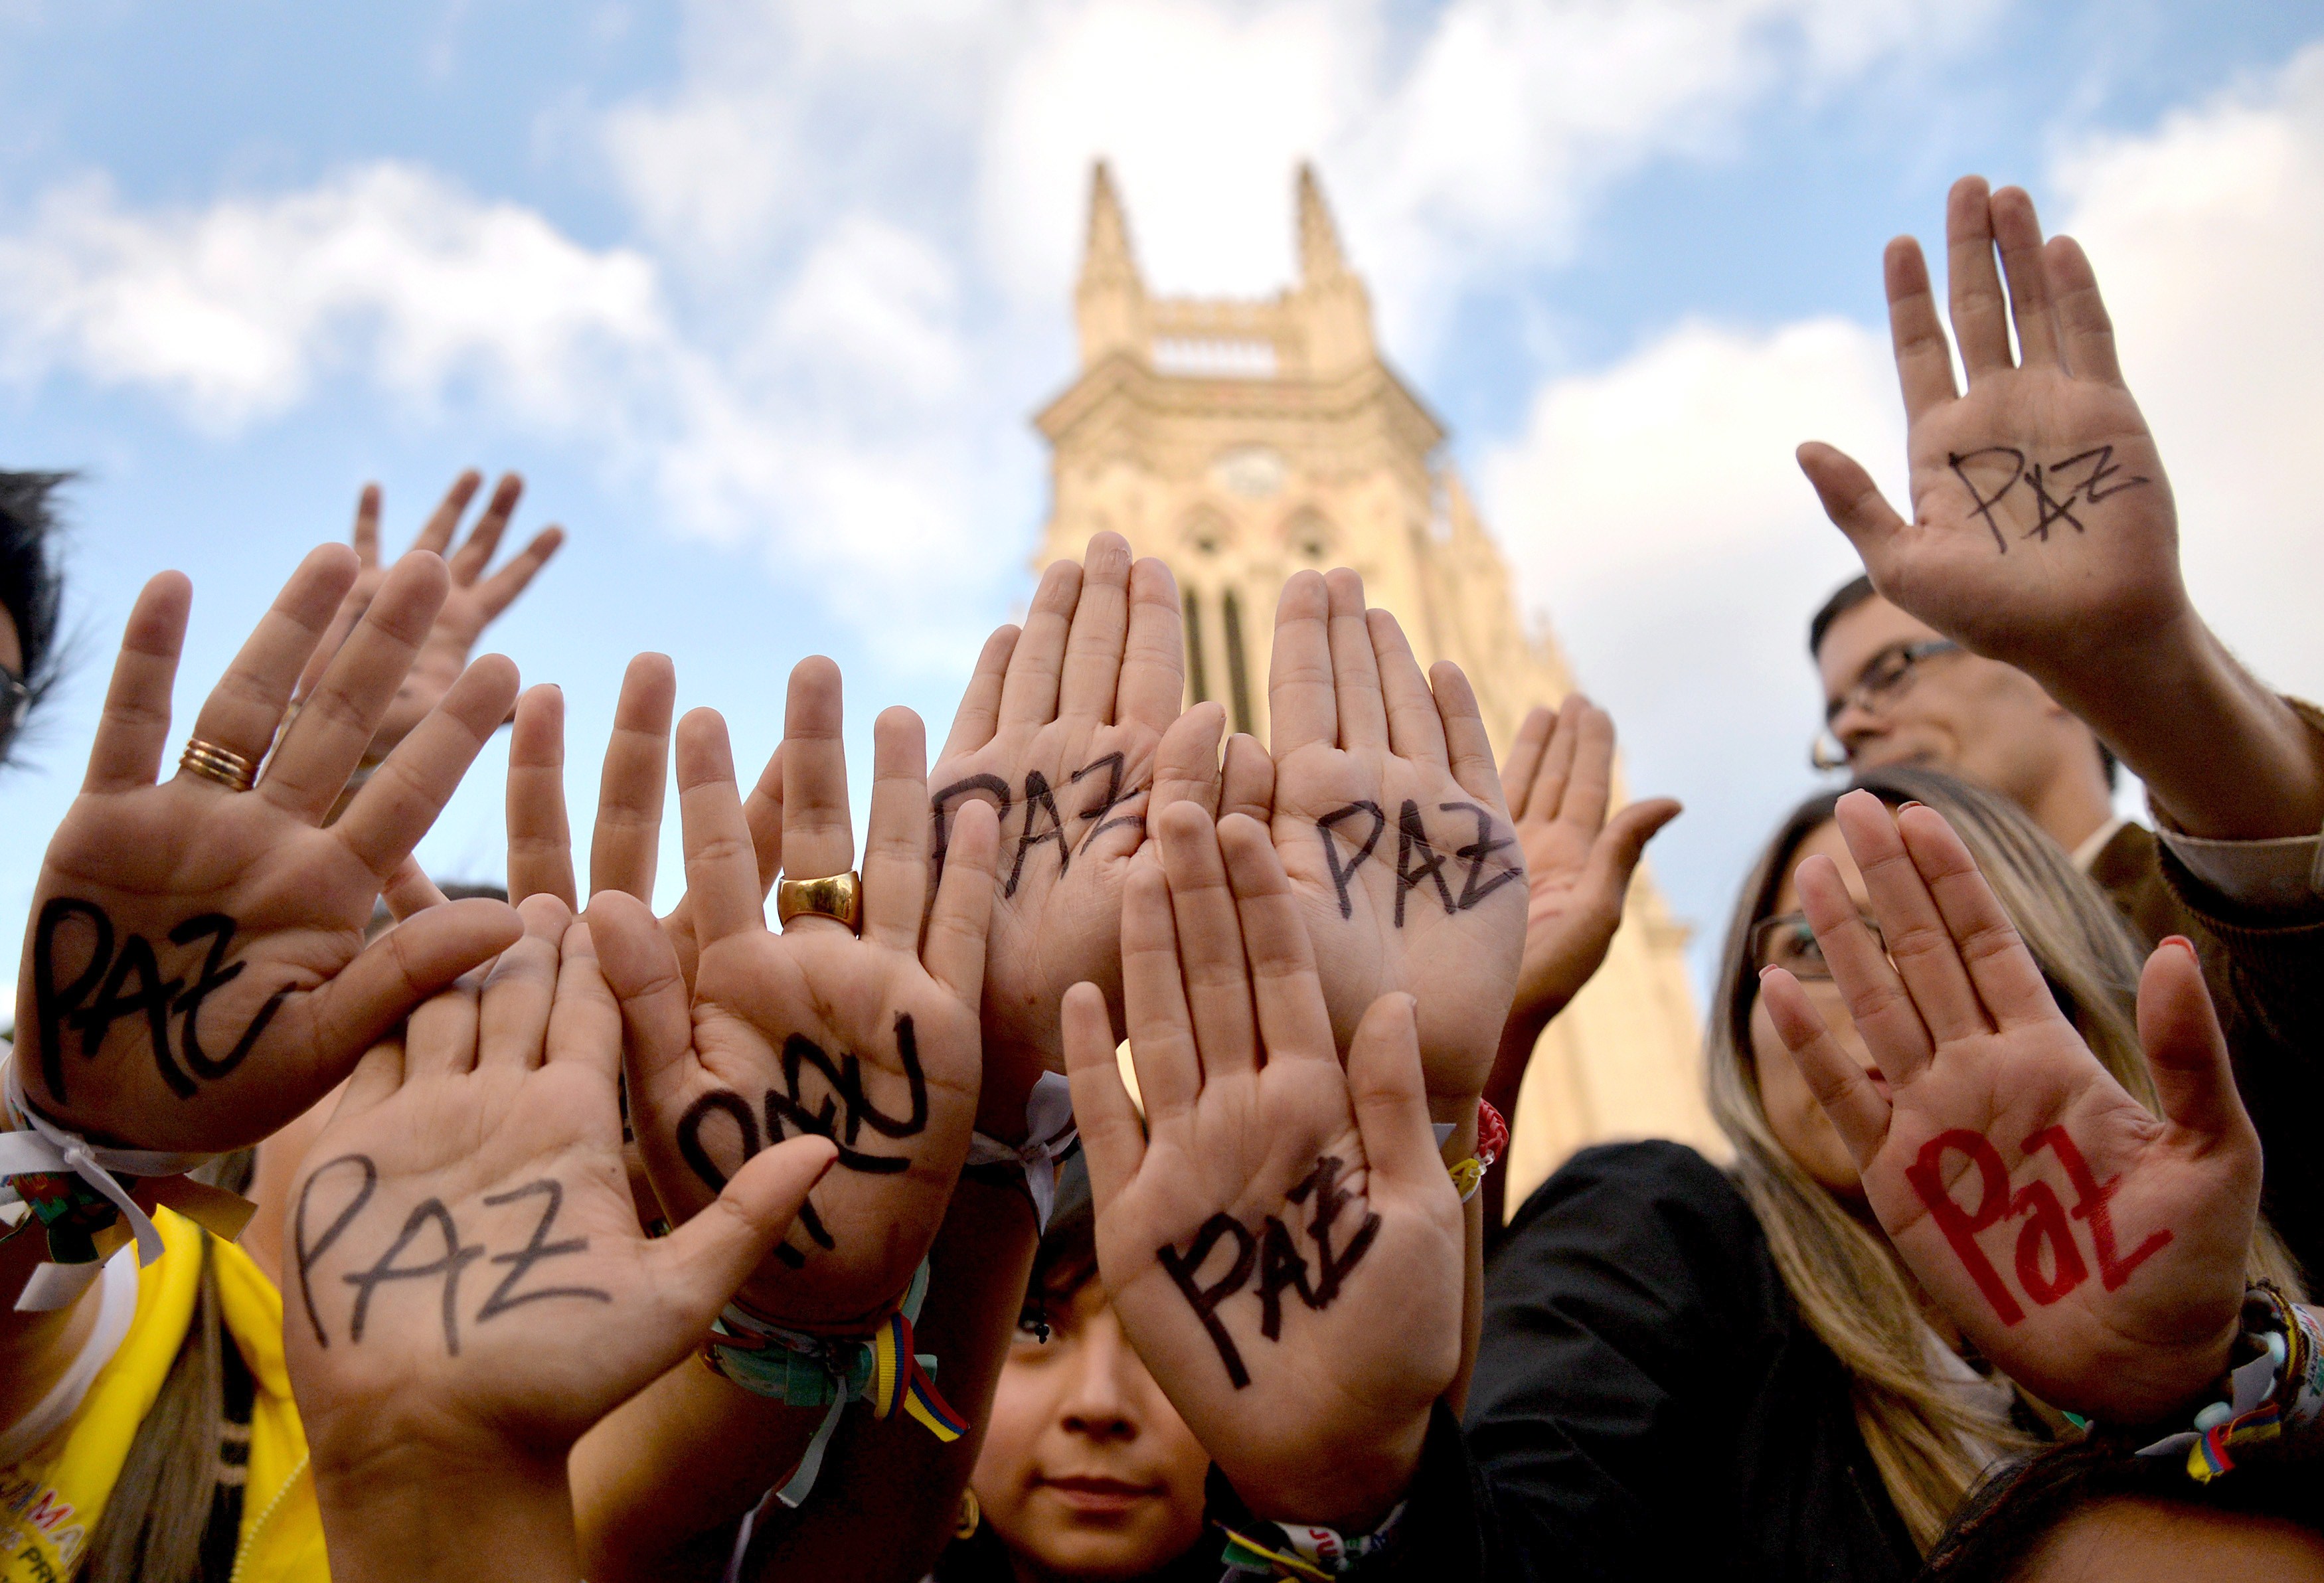 zzzzinte1Supporters of Colombian president and presidential candidate Juan Manuel Santos raise their hands with the word "Peace" written on them during a peace event in Bogota, on June 11, 2014. Colombia's government and the country's second largest guerrilla group, the National Liberation Army (ELN), announced on the eve they have opened peace talks, which adds to those taking place with the FARC, with a tense runoff presidential election just days away. AFP PHOTO/Diana Sanchez zzzz